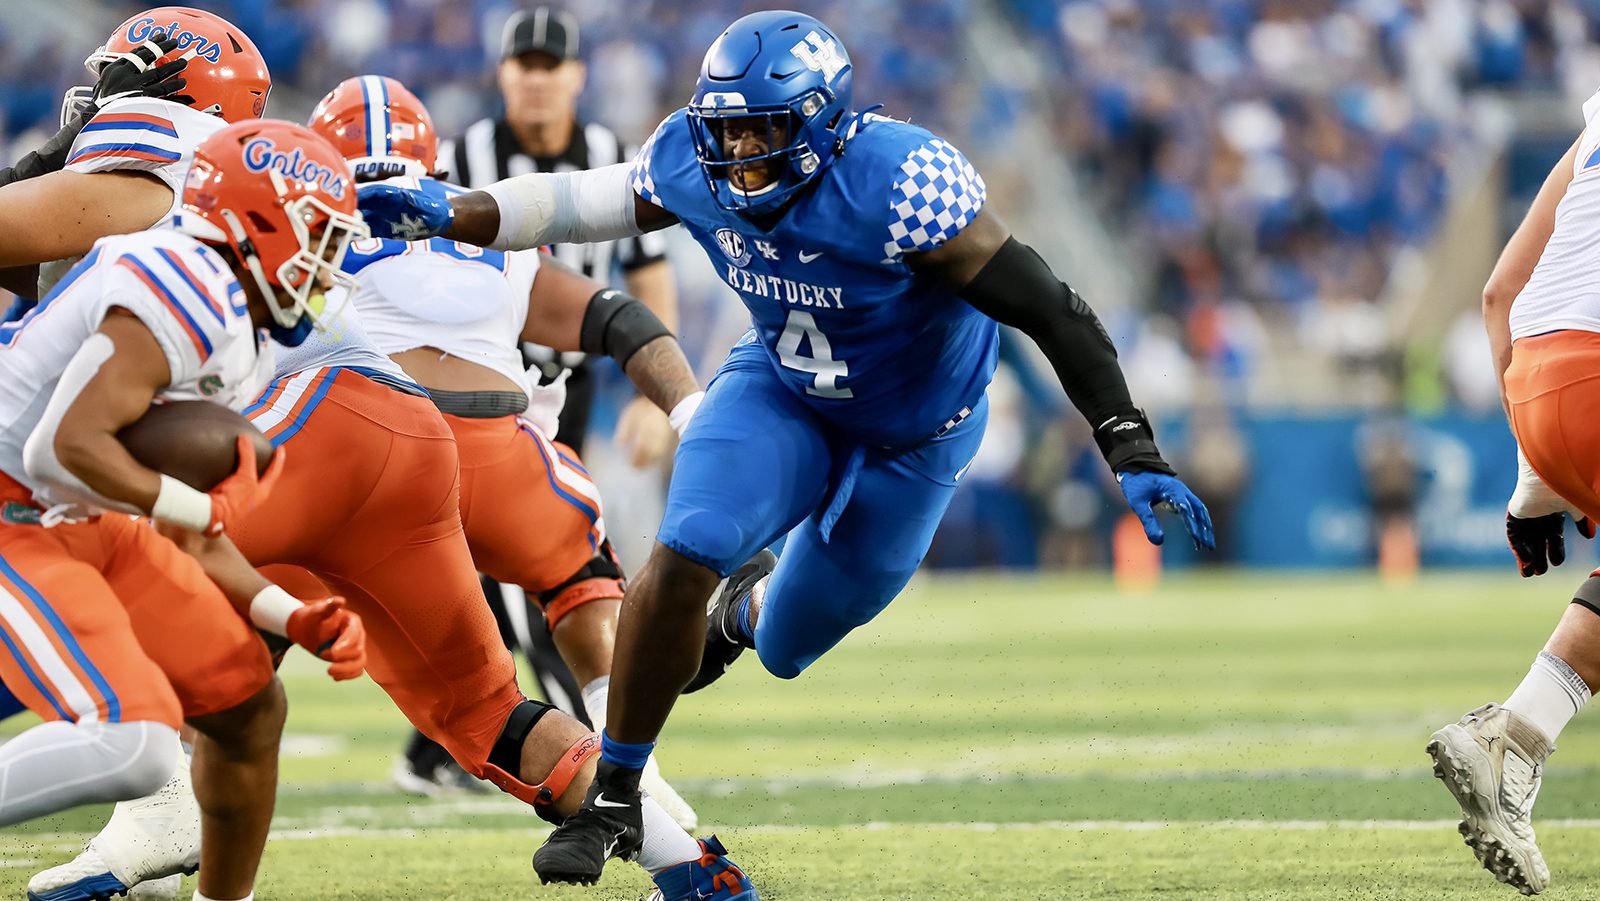 Kentucky pass rusher Josh Paschal is making the most out of his NIL opportunities. Check out this hilarious commercial for a dentist office in Kentucky.